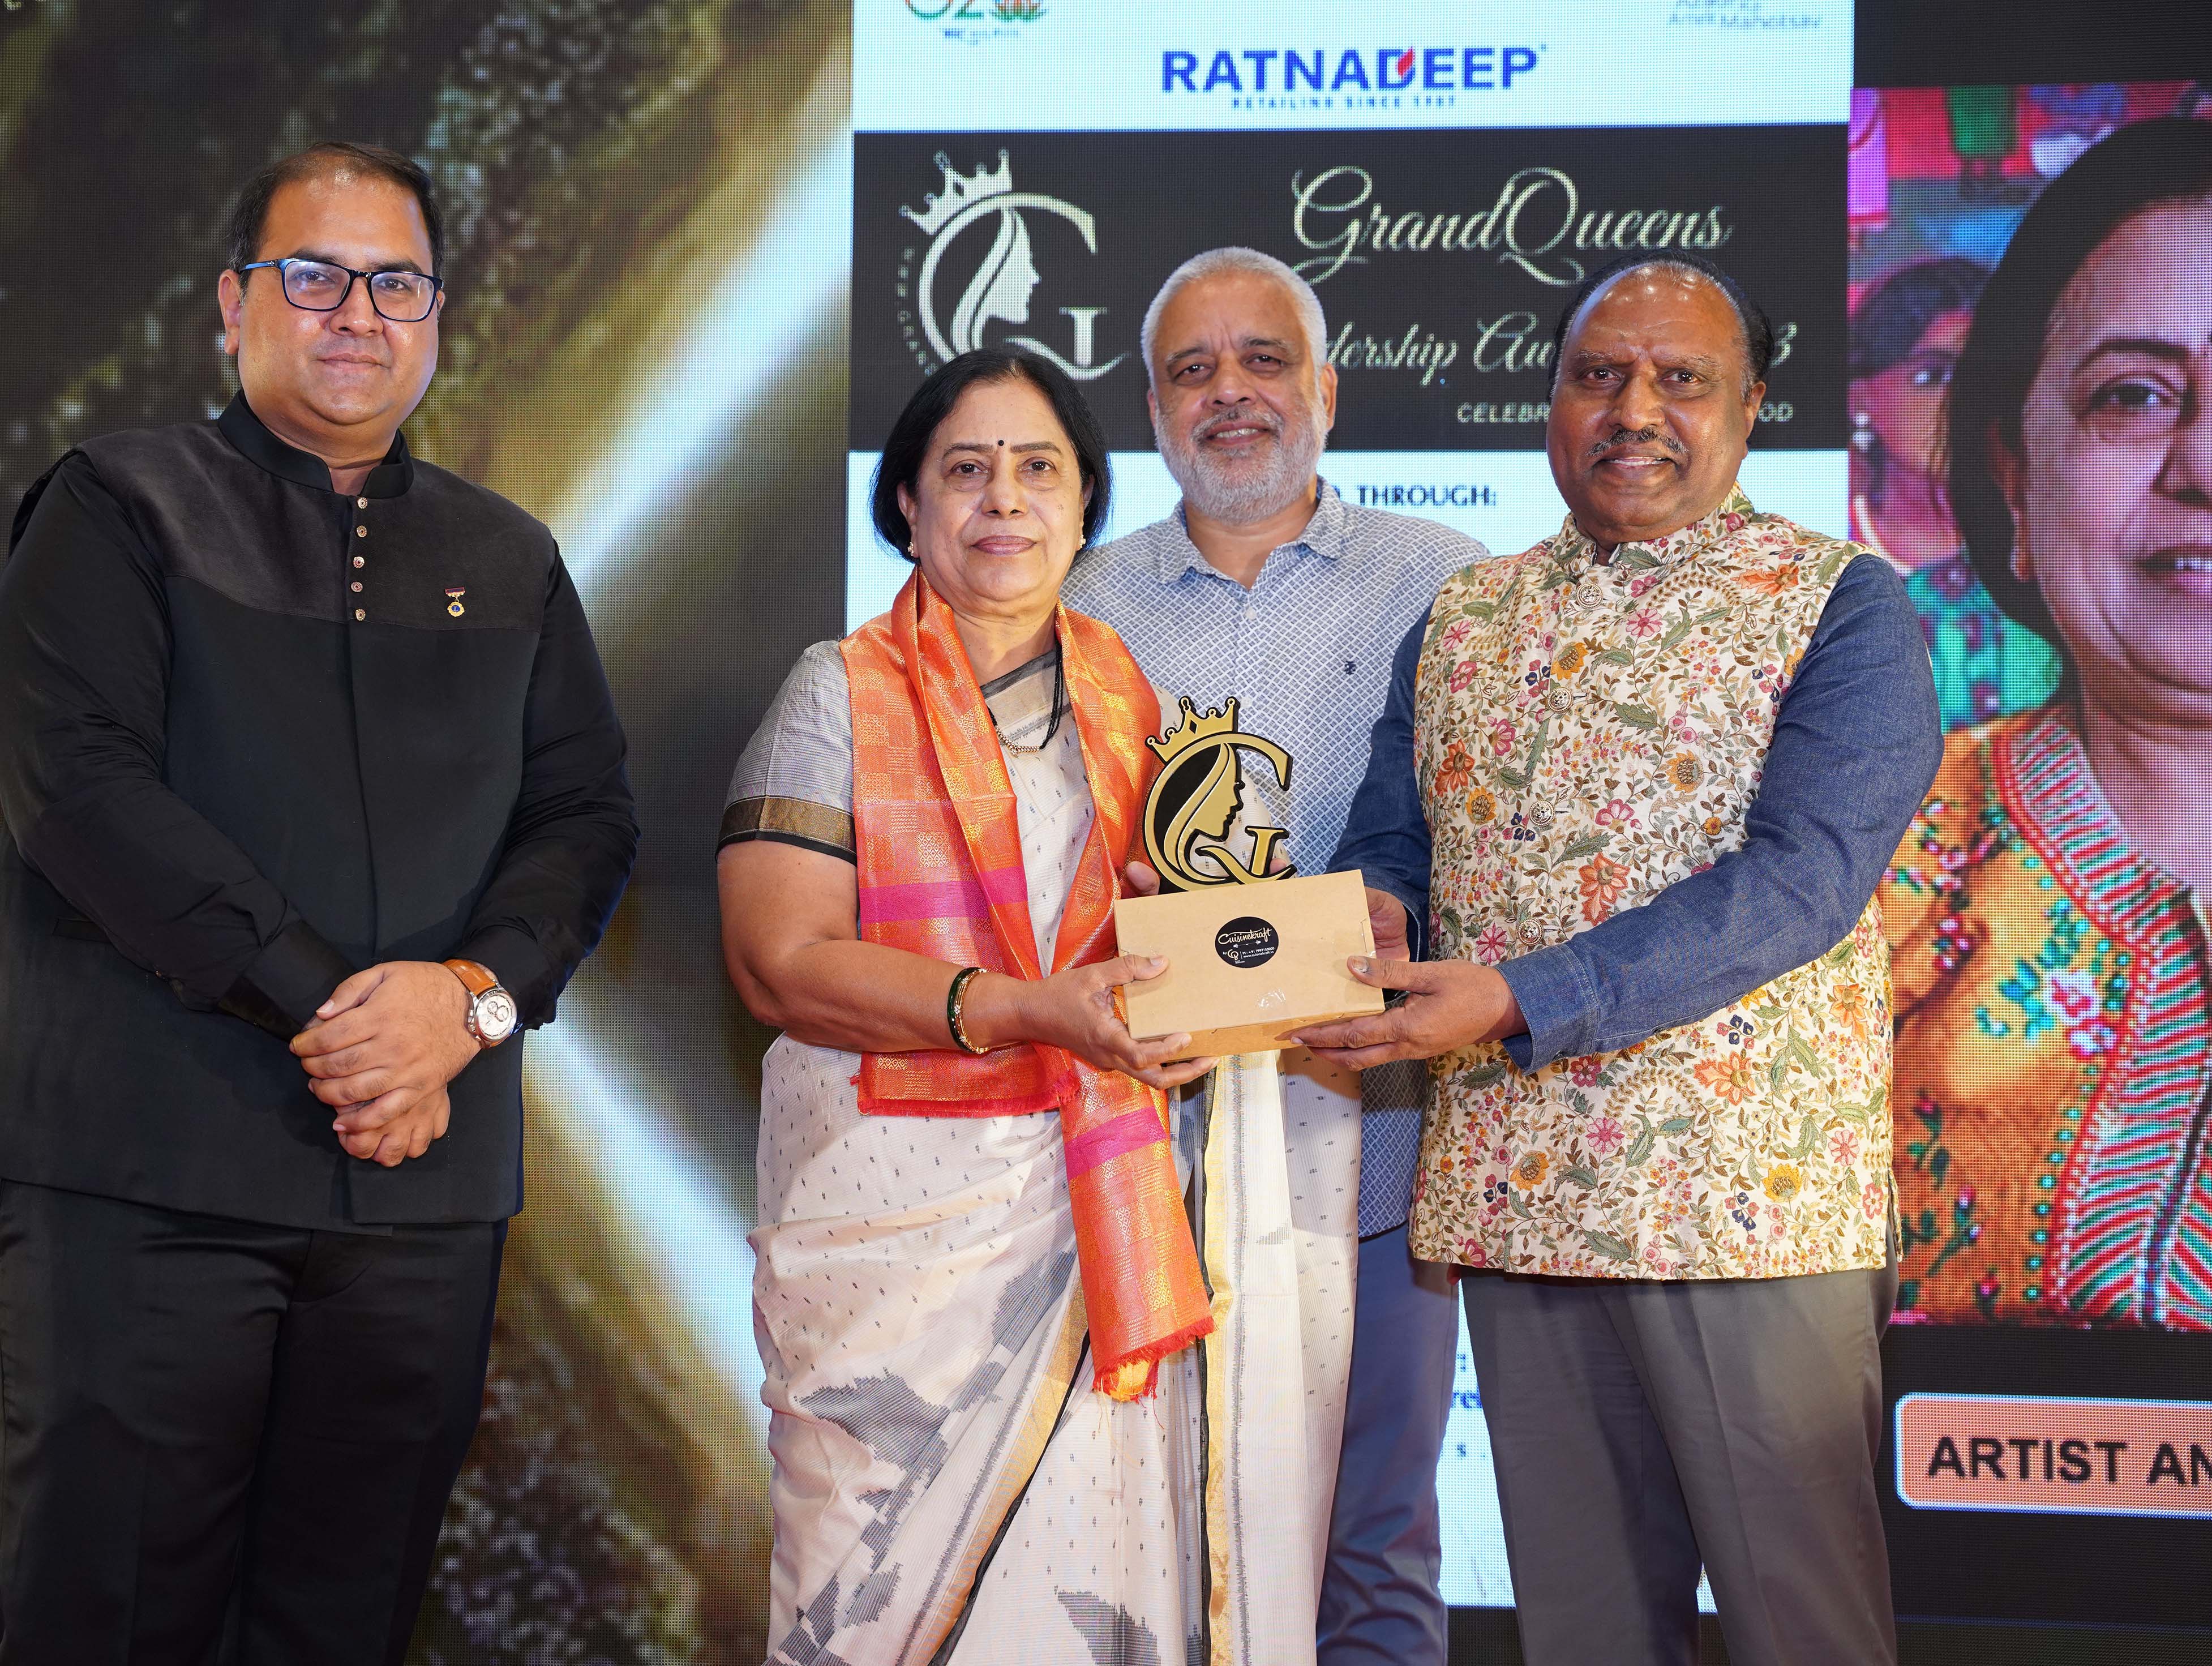 Ratnadeep Grand Queens Leadership Awards 2023, presented to Women leaders at a glittering ceremony!